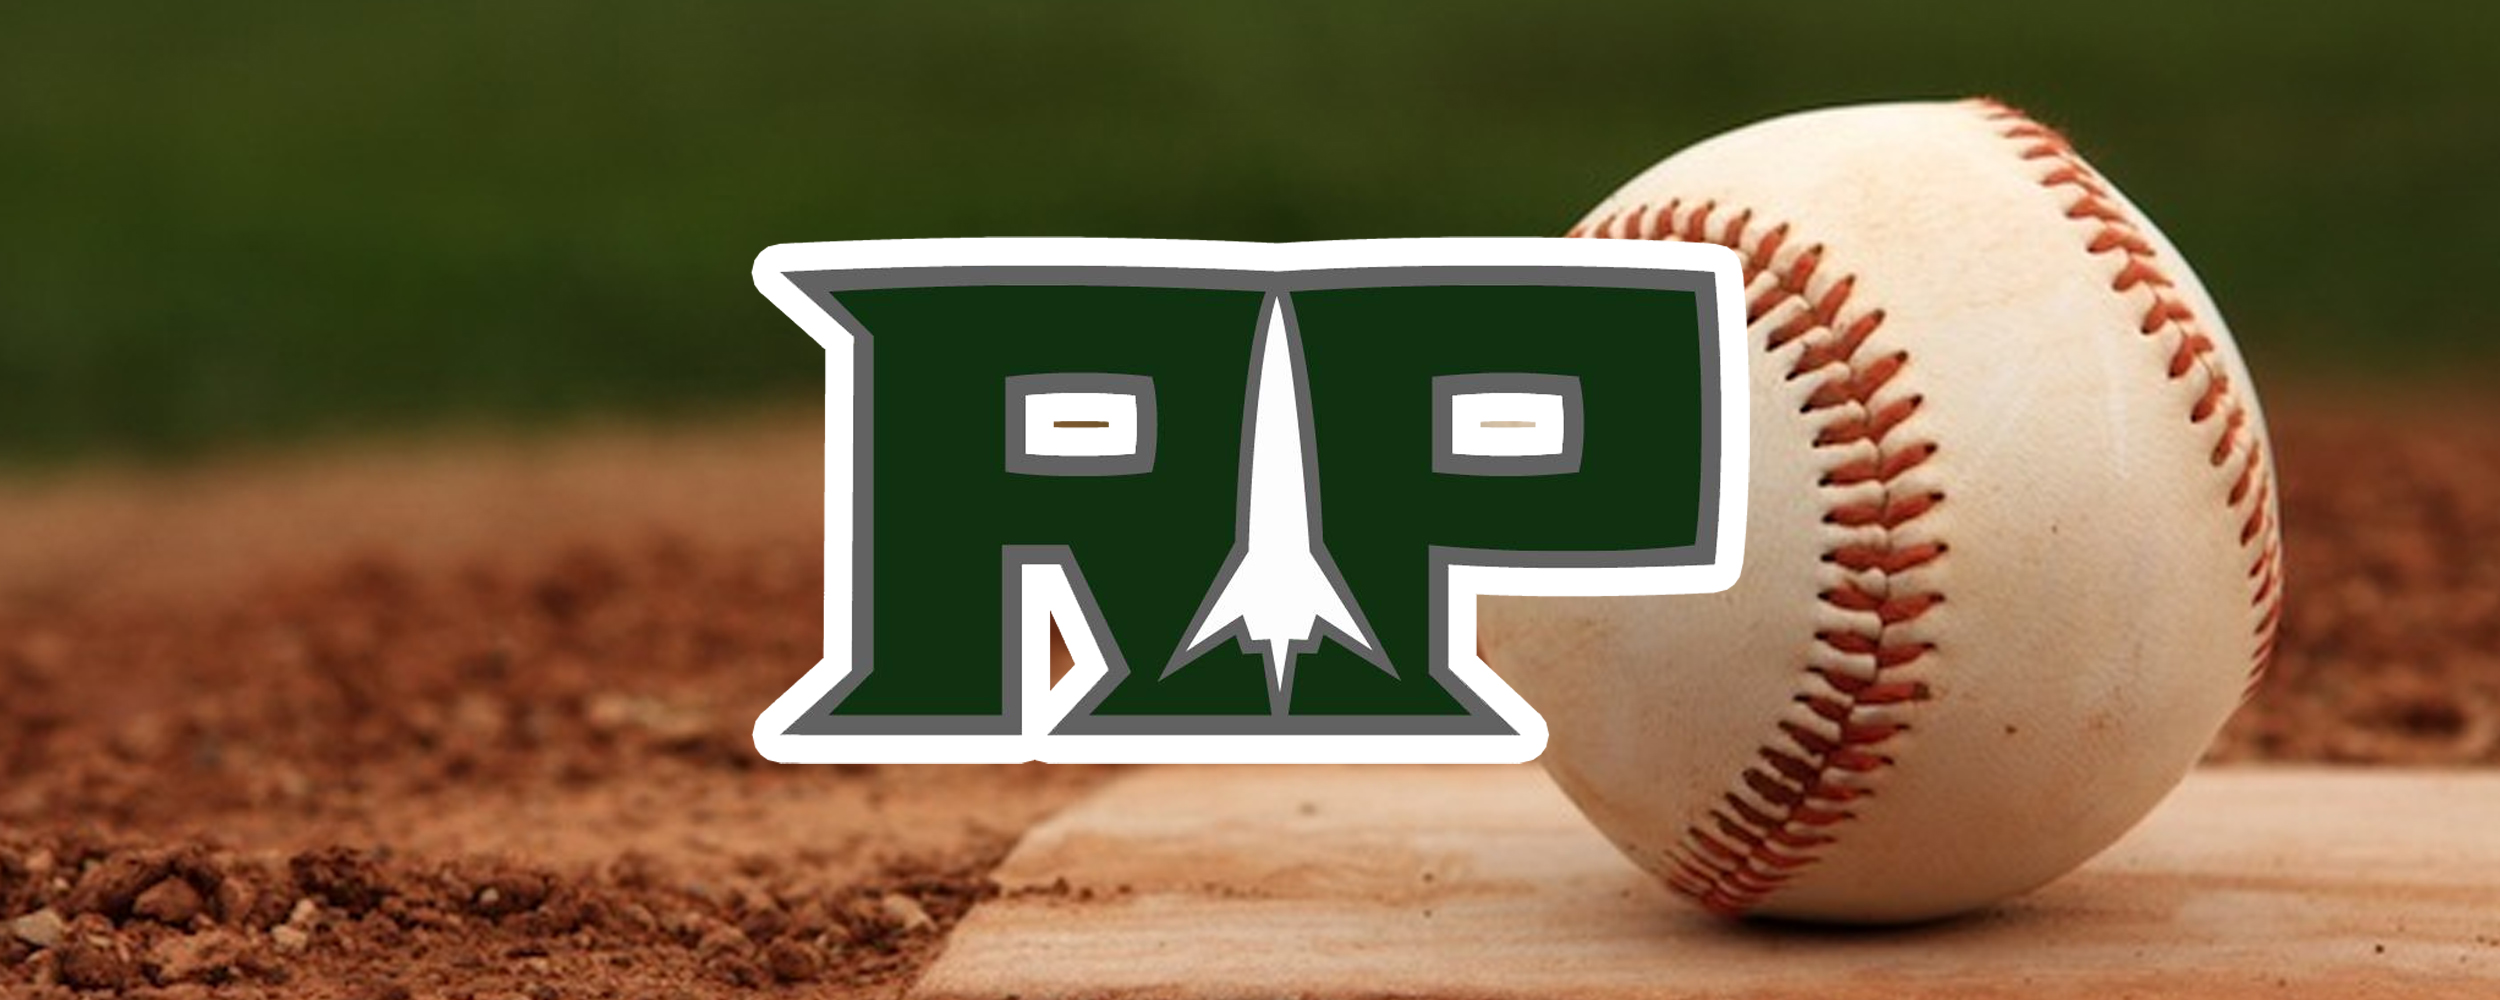 Reeths-Puffer routs Grand Rapids Union in OK-Green baseball game